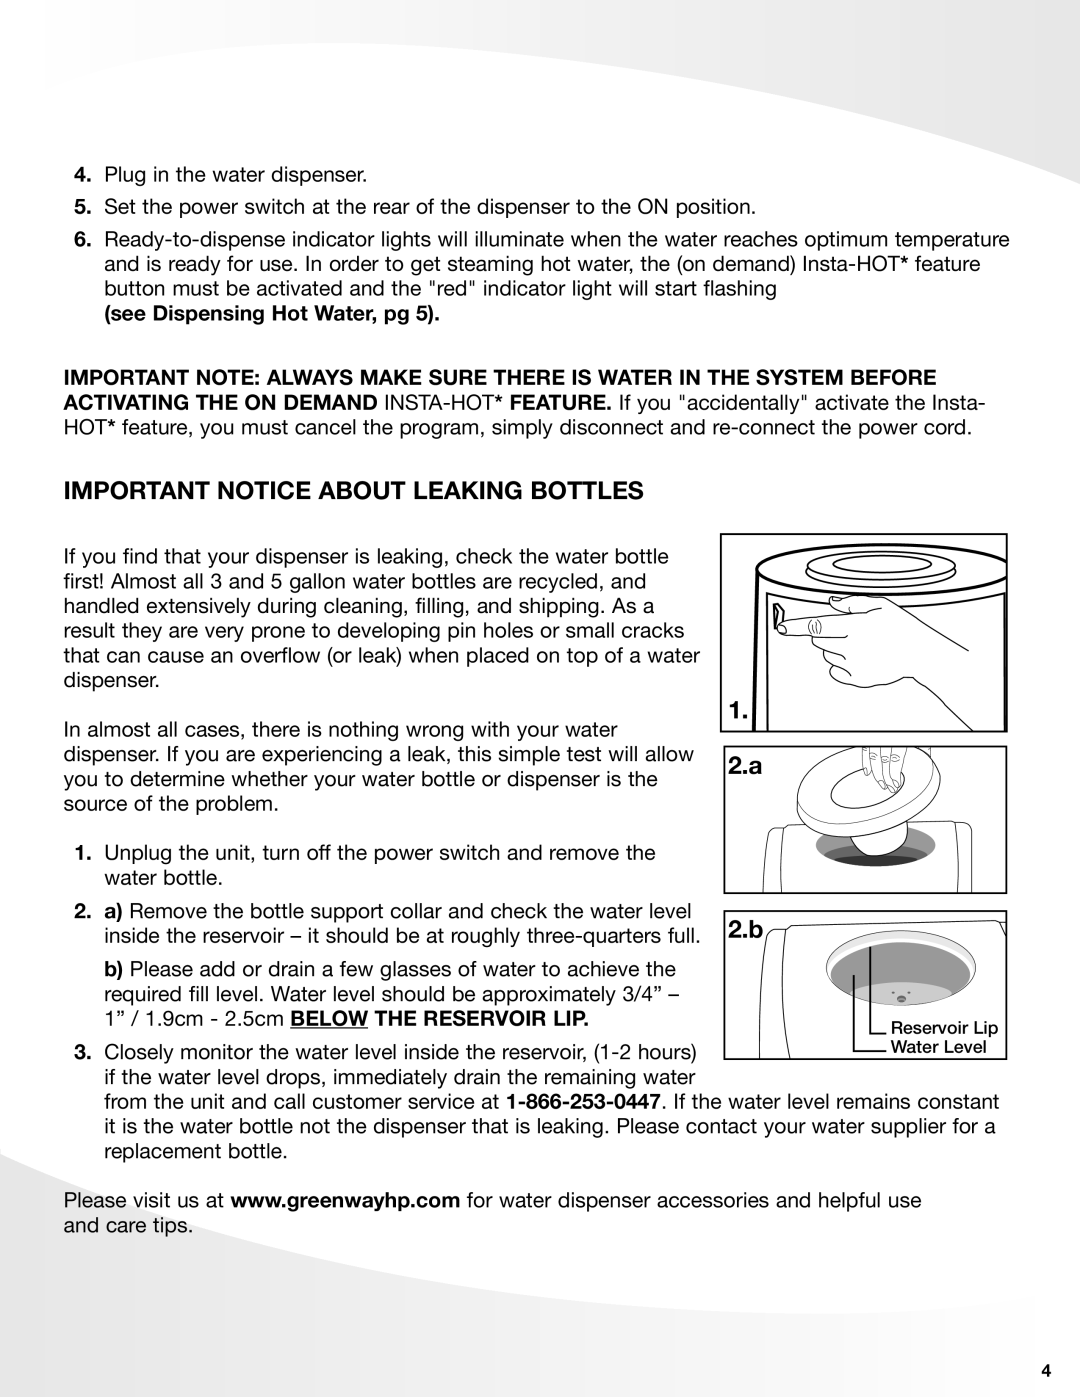 Greenway Home Products VWD2636W-1, VWD2636BLK-1 manual IMPORTANT NOTICE ABout leaking bottles, see Dispensing Hot Water, pg 